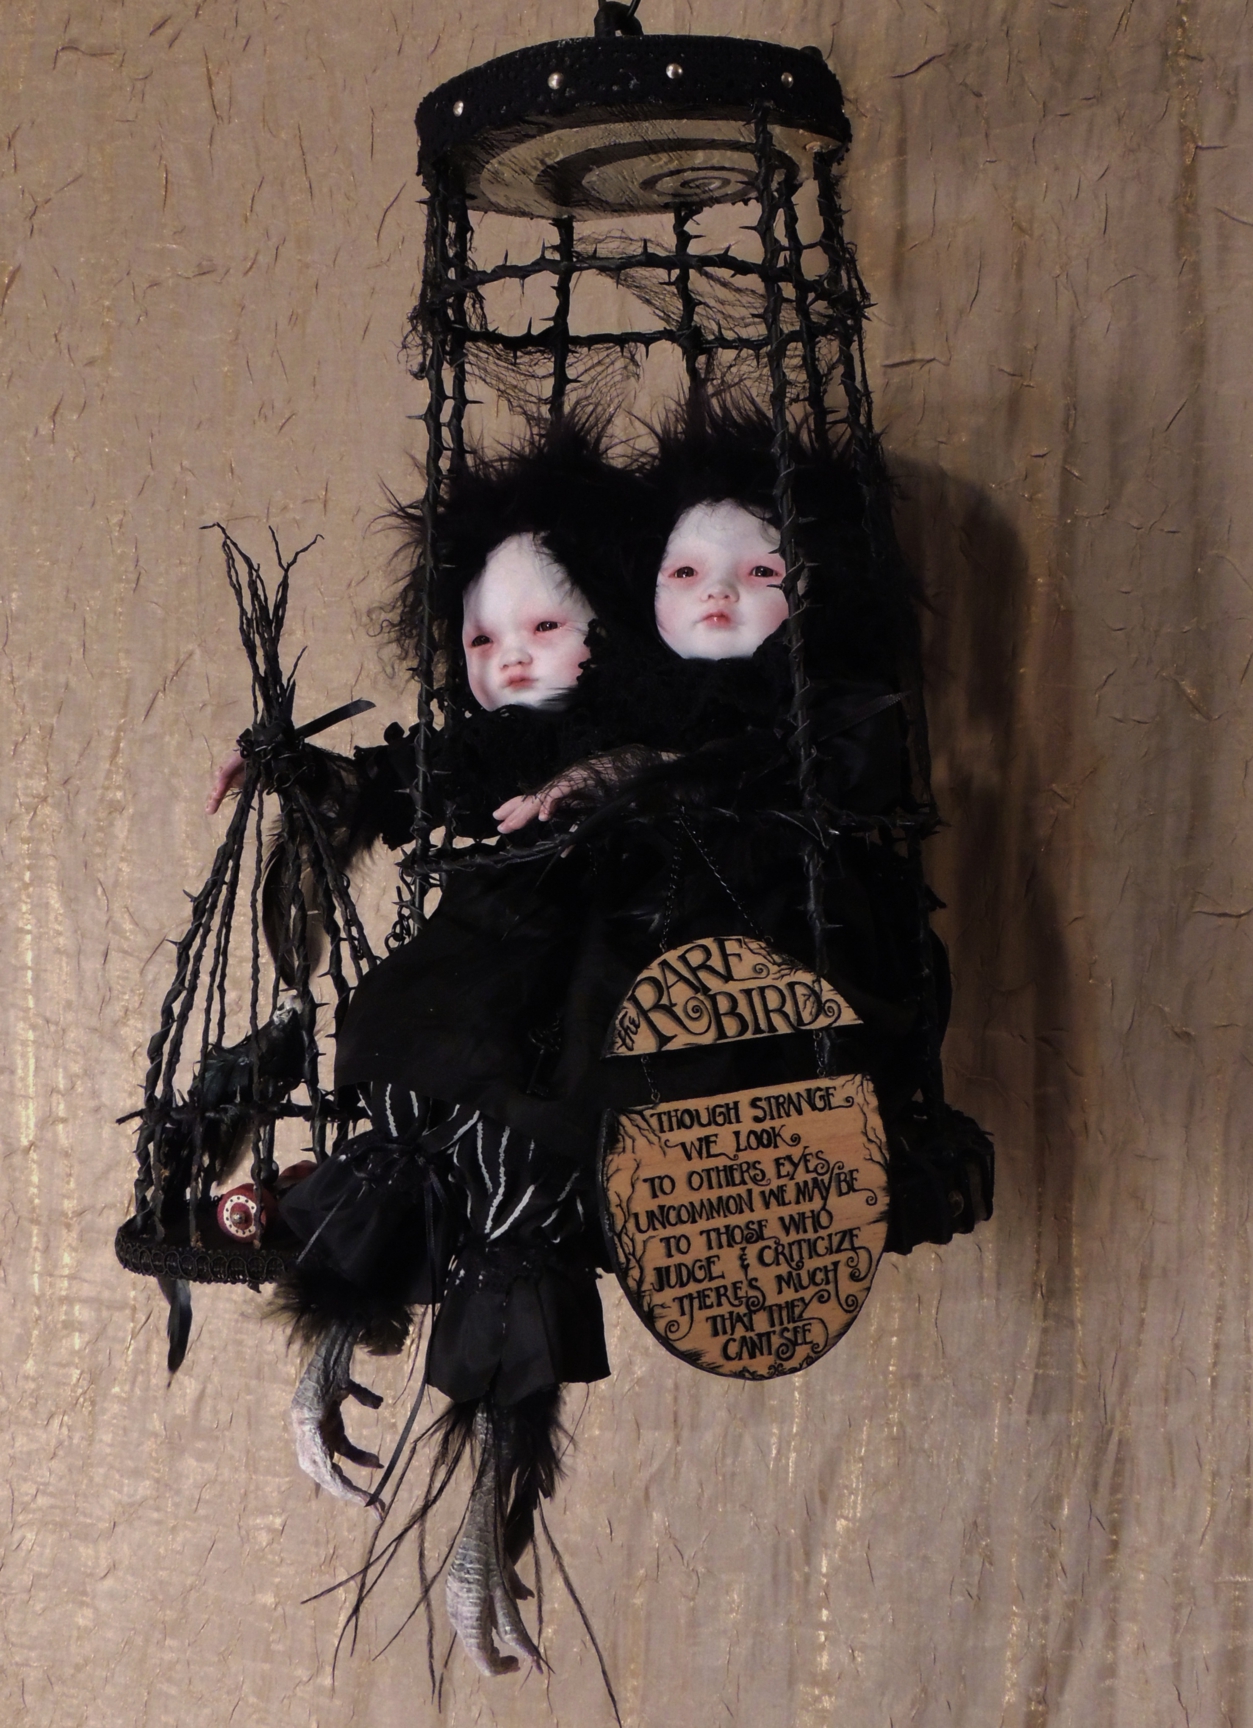 taxidermy mixed media art doll assemblage art piece featuring black feathered pale asian doll-faced conjoined twins sitting in a hanging cage.